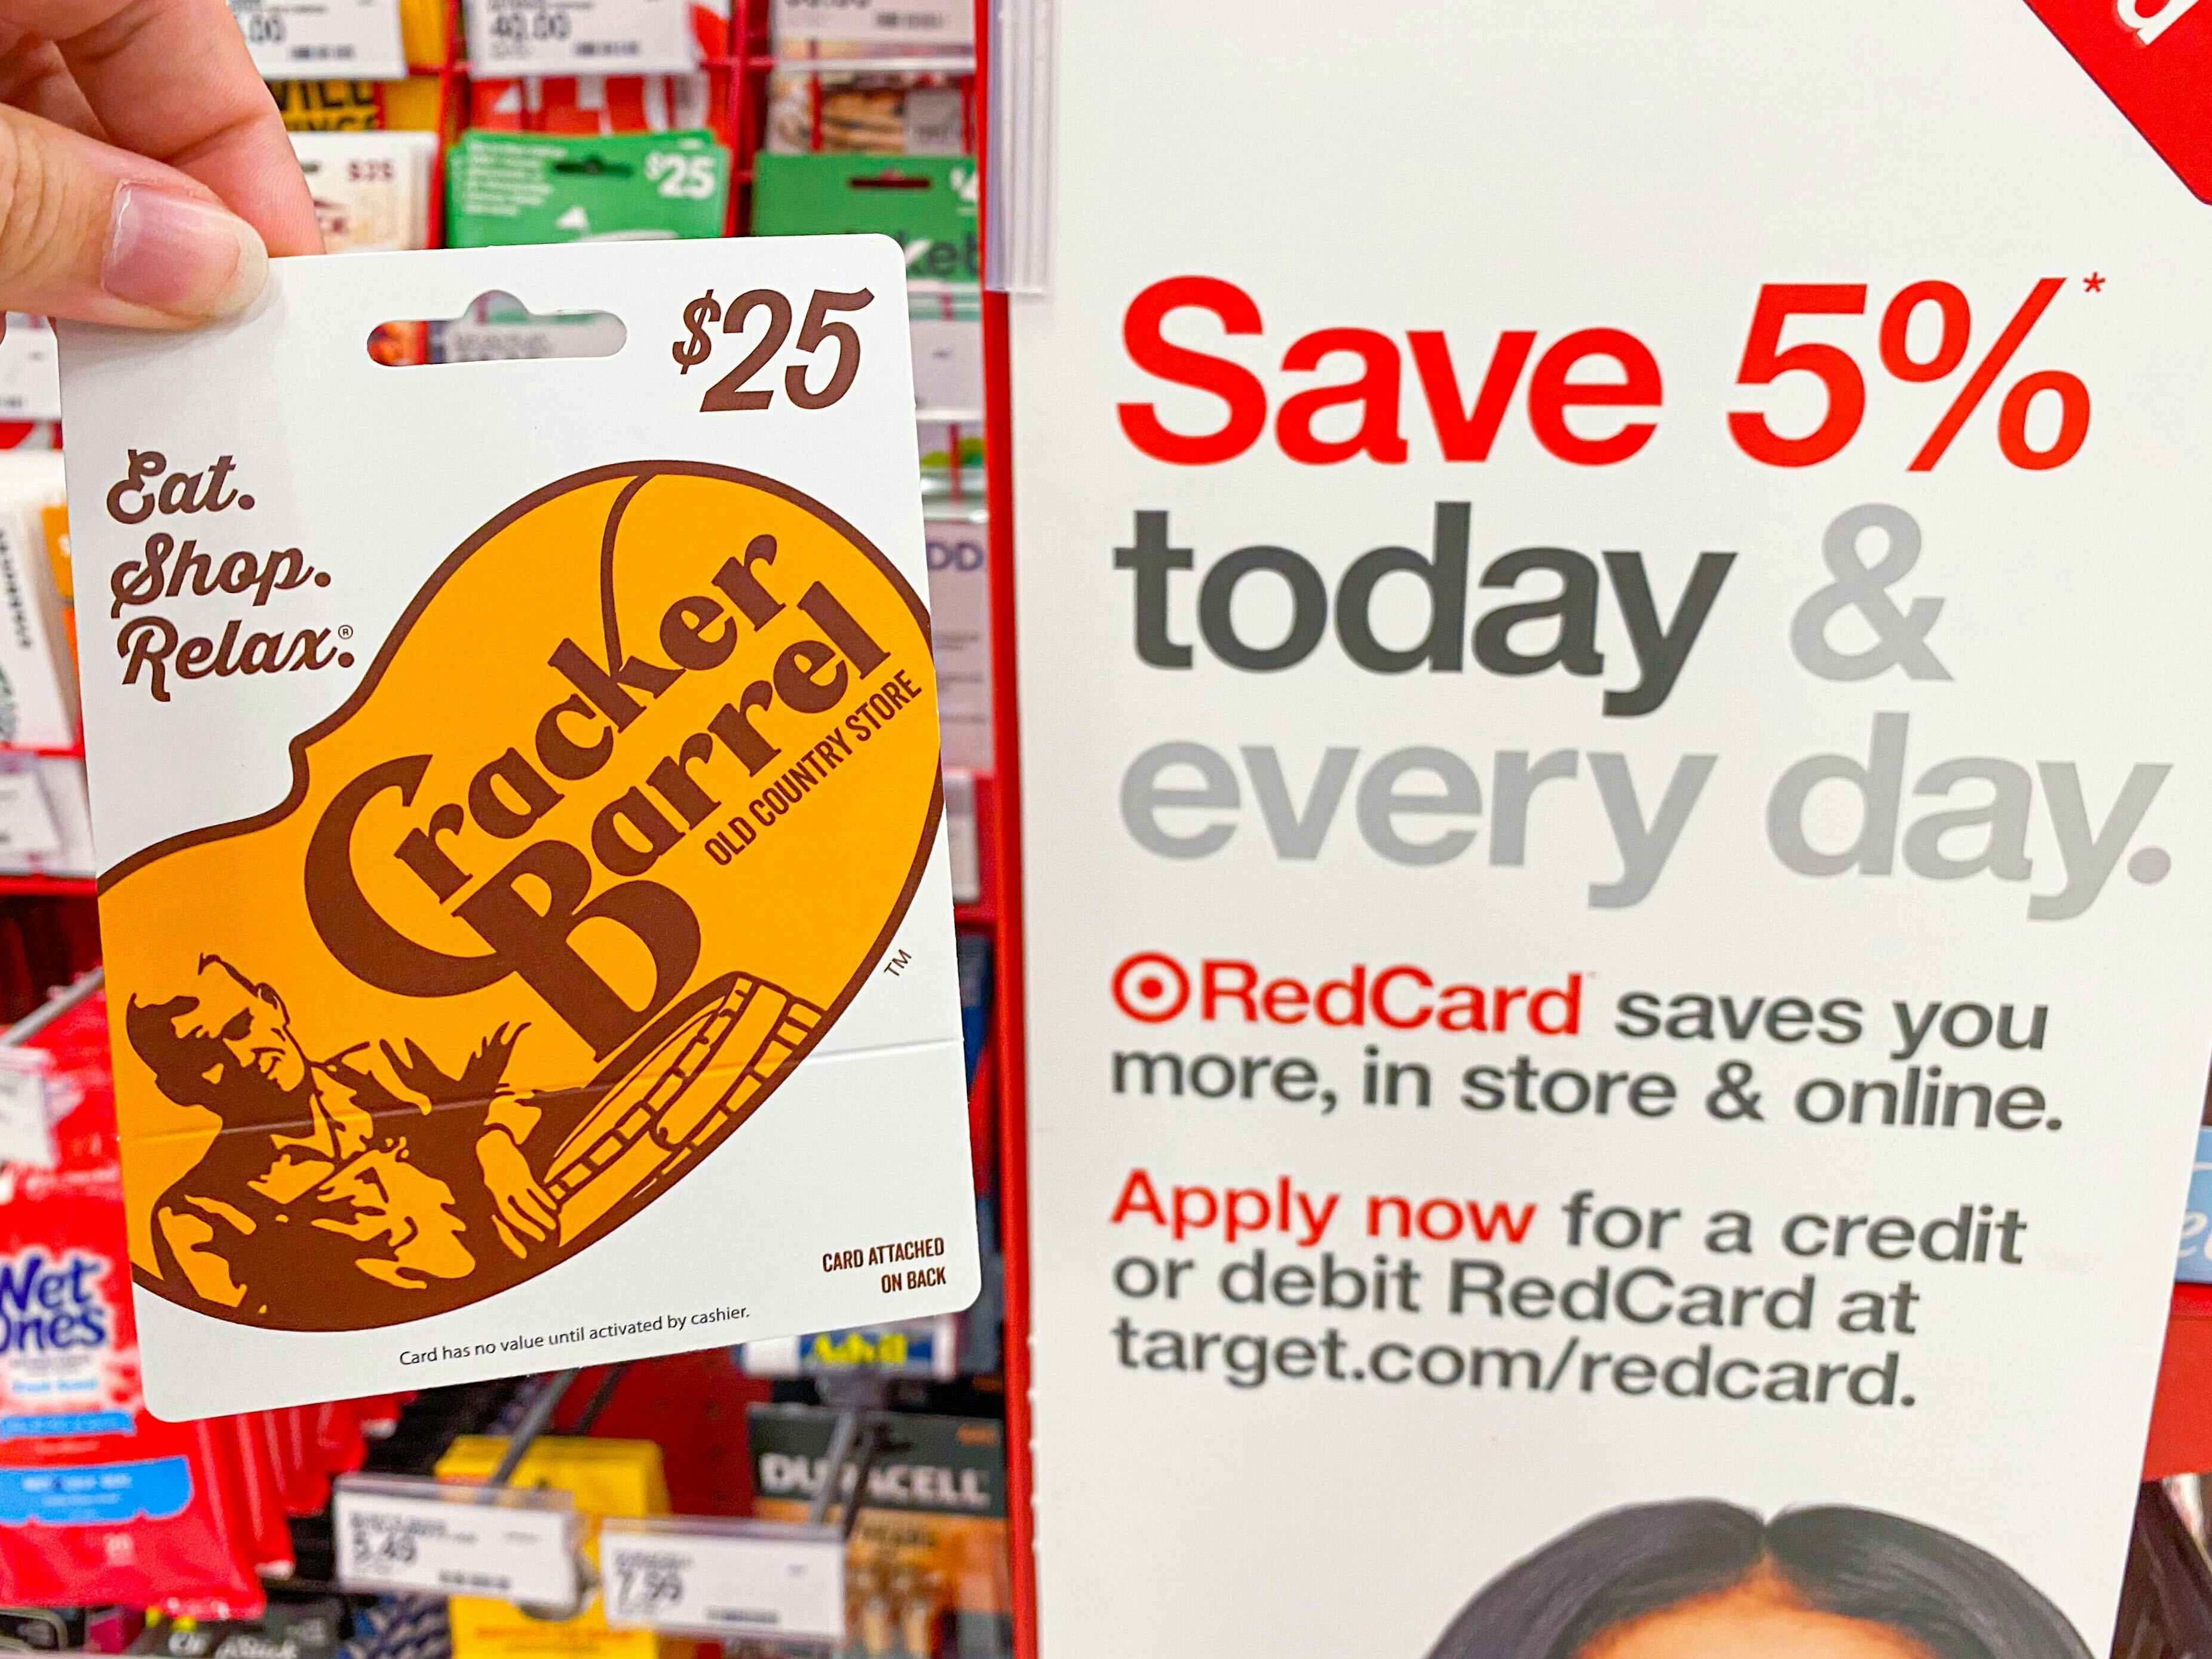 A person's hand holding a Cracker Barrel gift card next to an advertisement for the RedCard at Target.